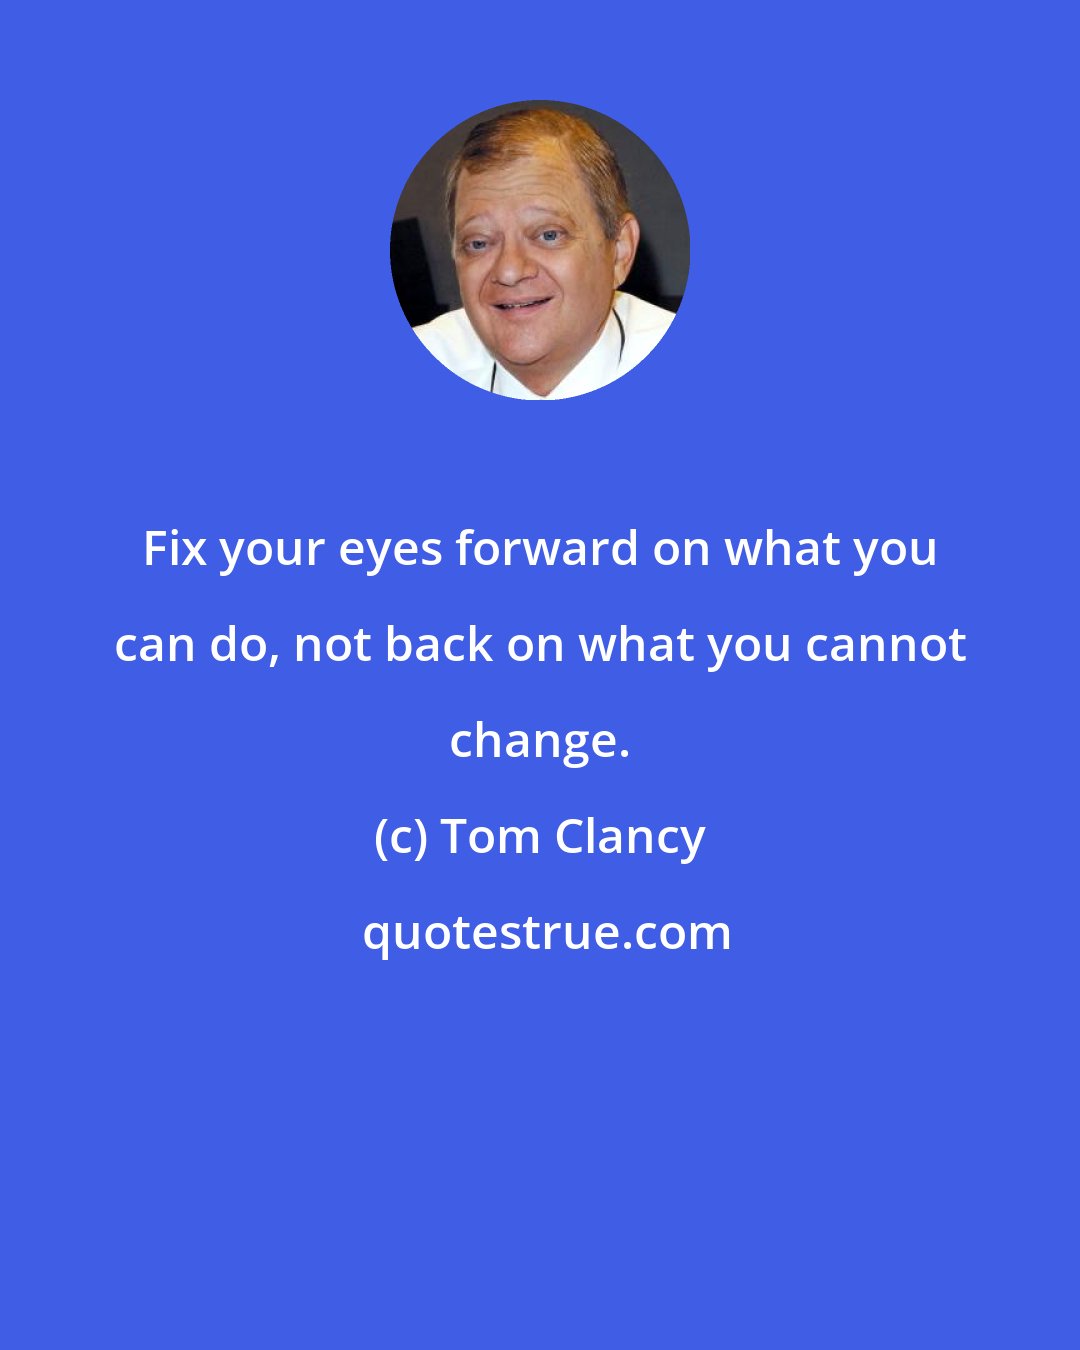 Tom Clancy: Fix your eyes forward on what you can do, not back on what you cannot change.